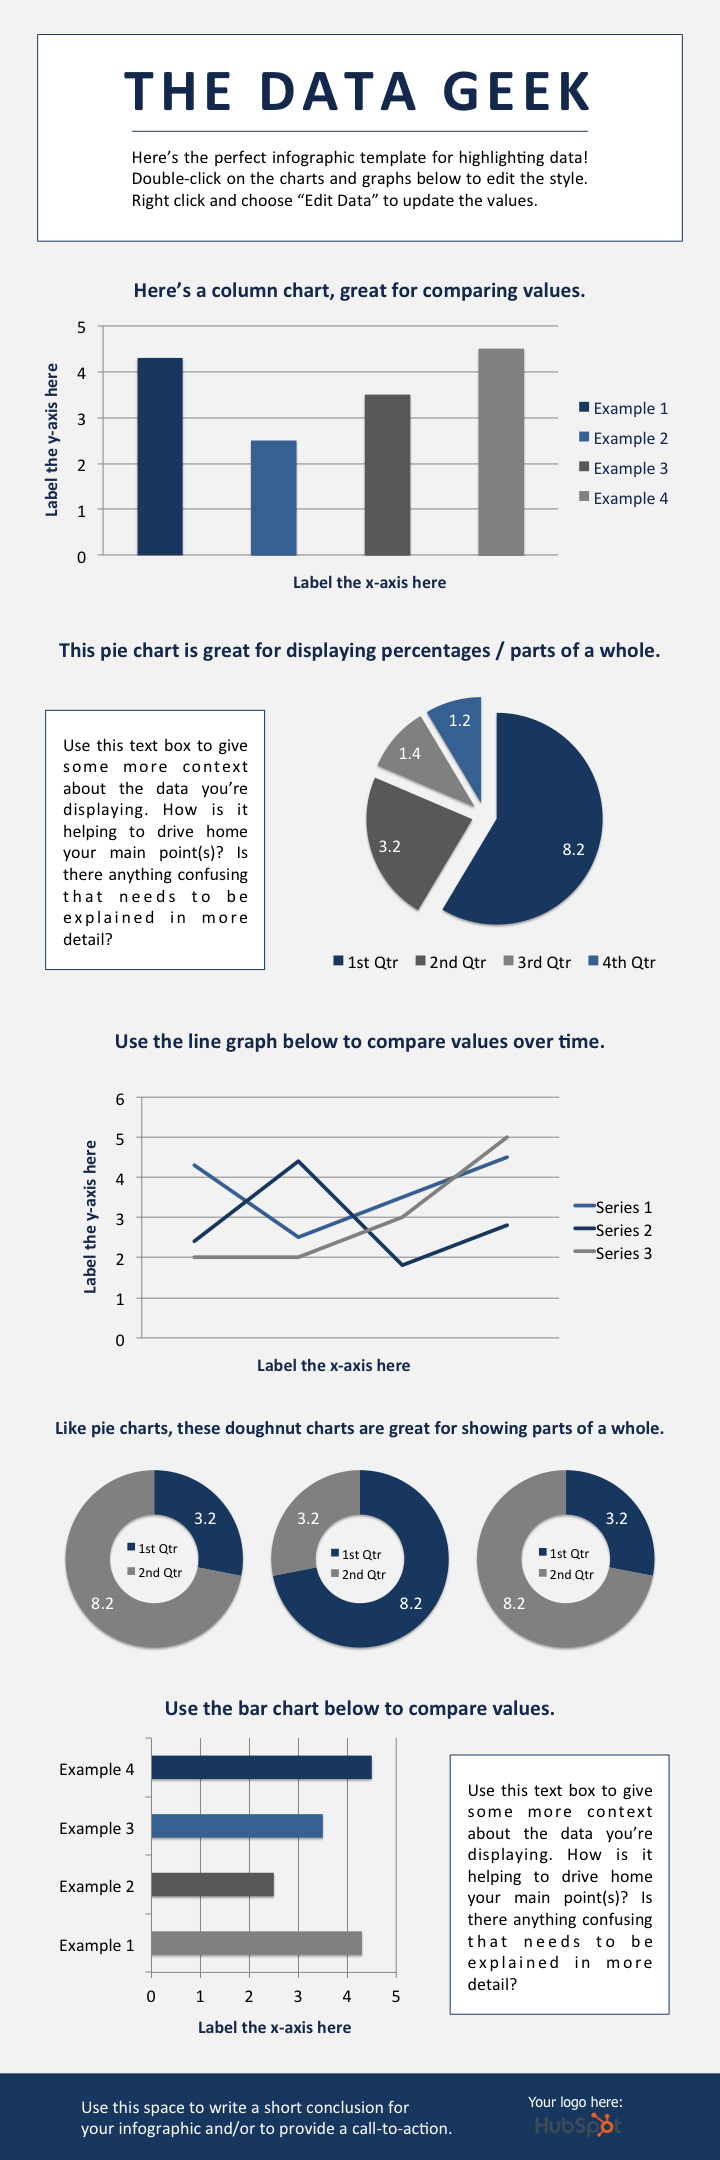 thedatageekinfographictemplate.png?width=669&name=thedatageekinfographictemplate - How To Create An Infographic In Powerpoint [+Free Templates]